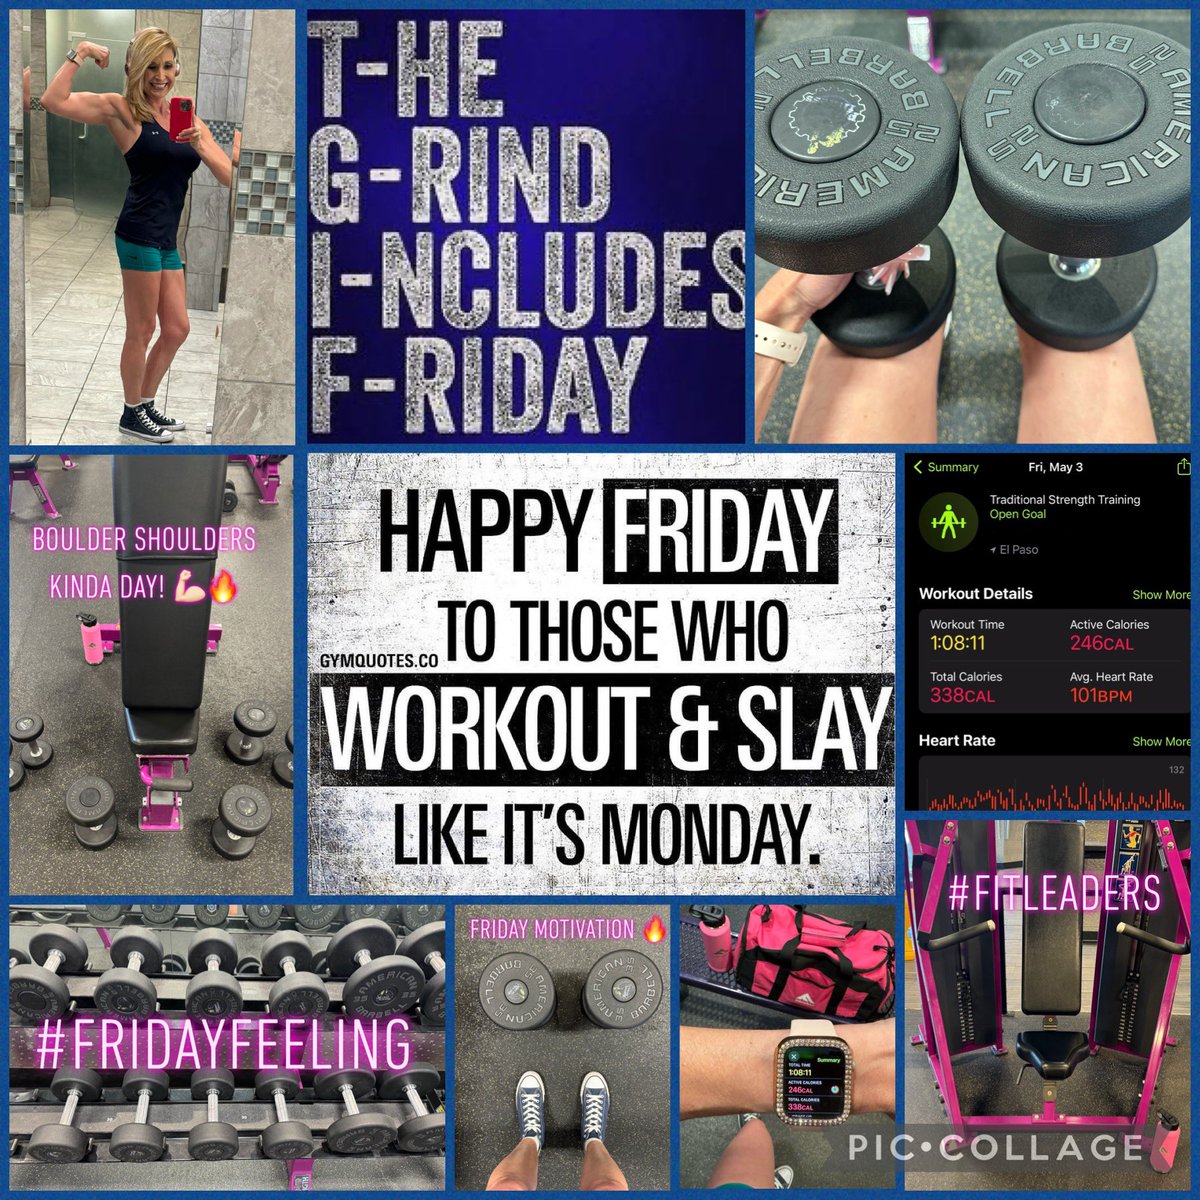 Happy Friday to those who workout & #slay like it’s Monday! 🔥🔥Flexing into the weekend with a big smile! 😊 Happy #FlexFriday! 💪🏻💕 #FridayVibes #FitLeaders @zjgalvan @PrincipalRoRod @DiocelinaBelle @educategalore @LorenaRubio123 @vggarcia13 @Amy_A_Ruvalcaba @DrSandraHernand